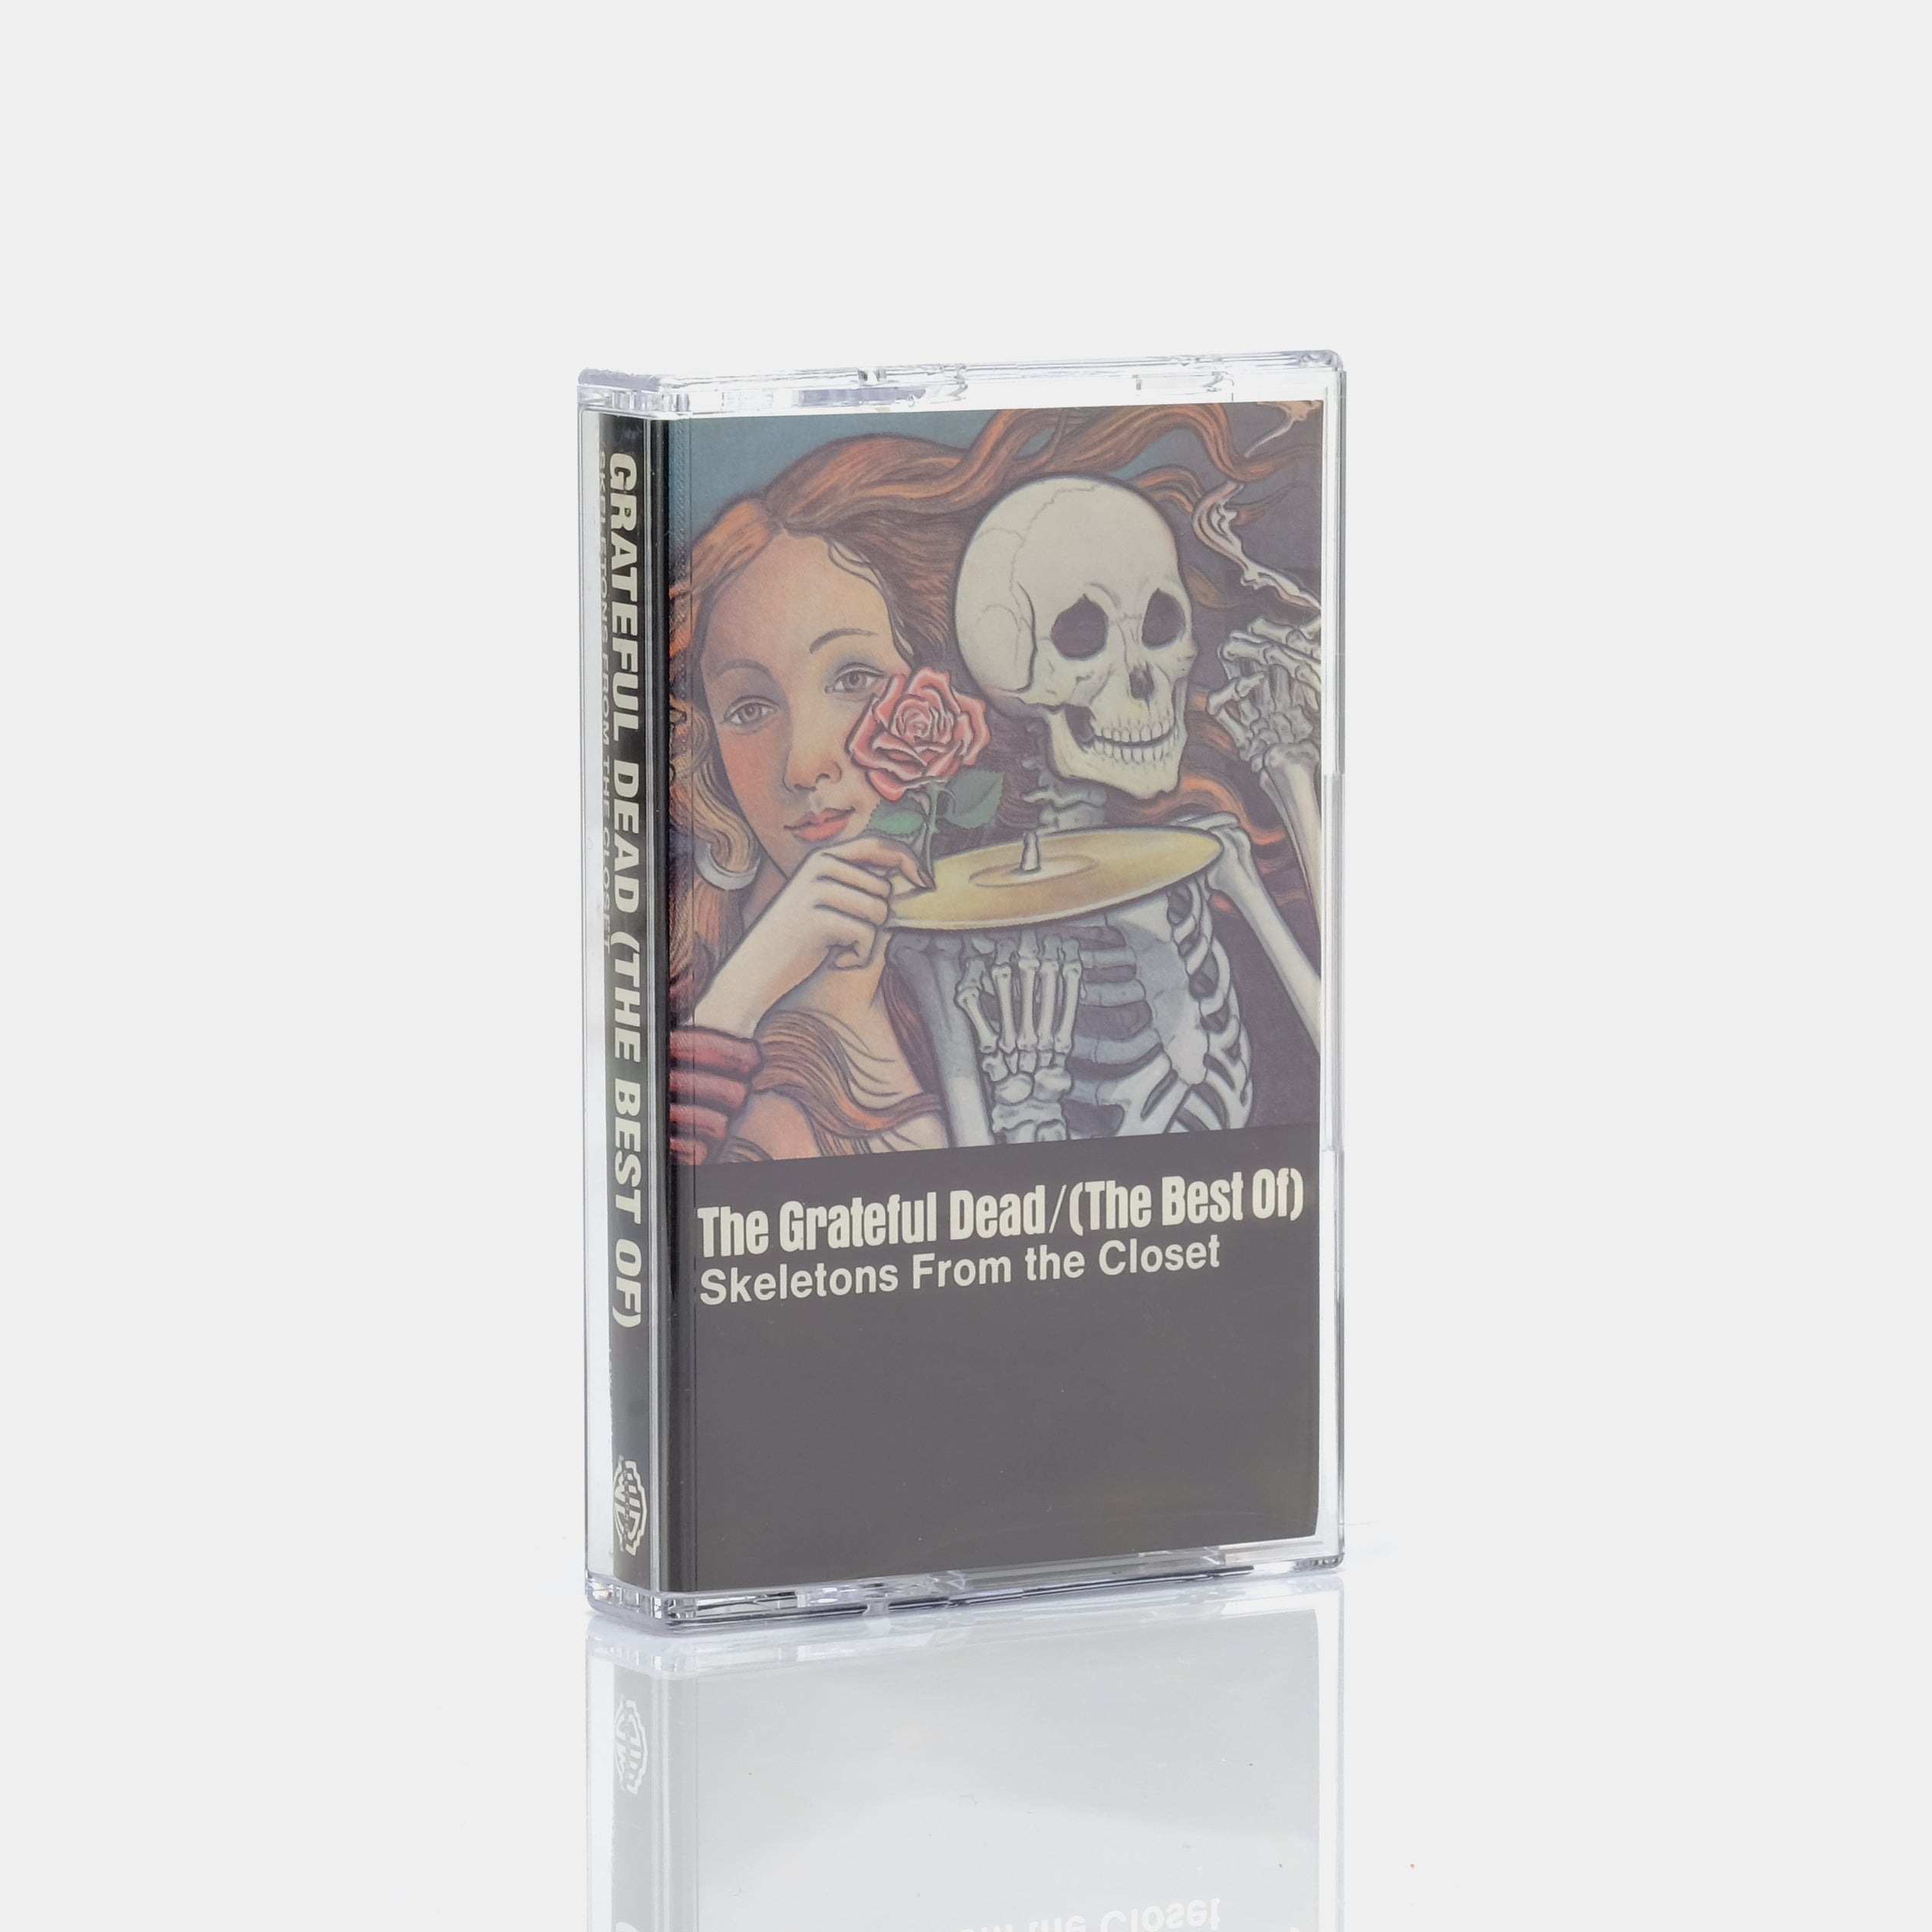 The Grateful Dead - (The Best Of) Skeletons From The Closet Cassette Tape